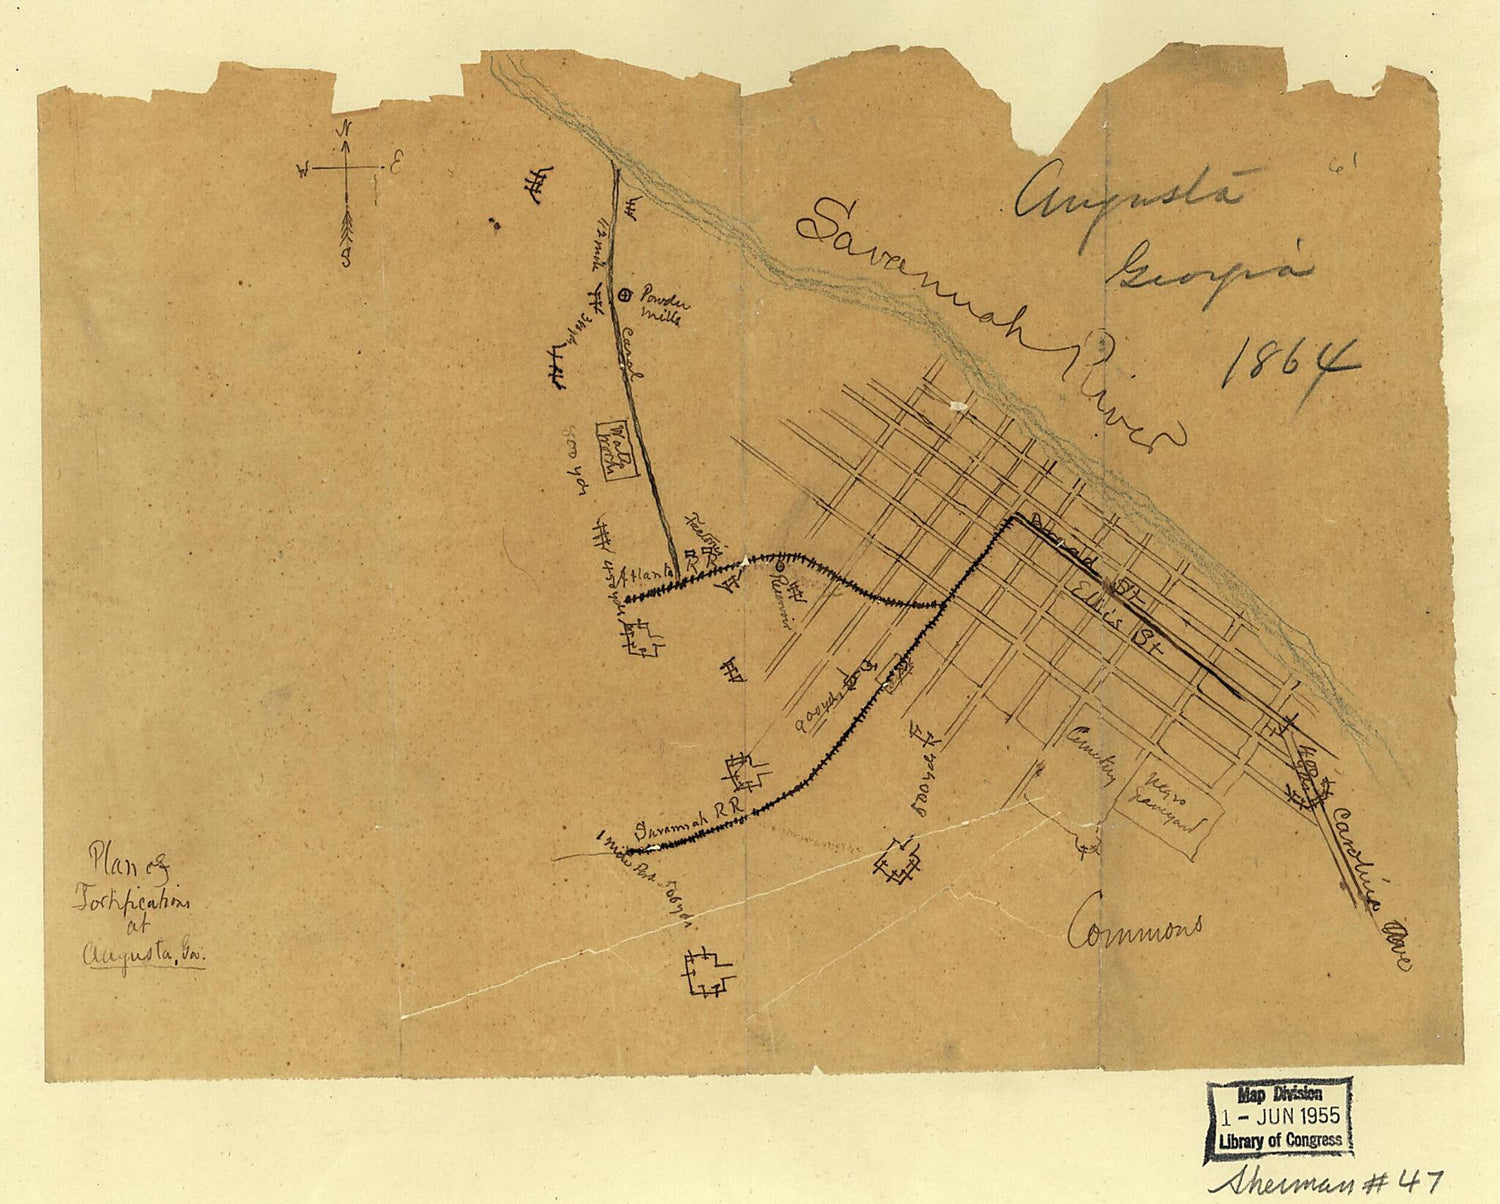 This old map of Plan of Fortifications at Augusta, Georgia (Augusta, Georgia from 1864) was created by  in 1864